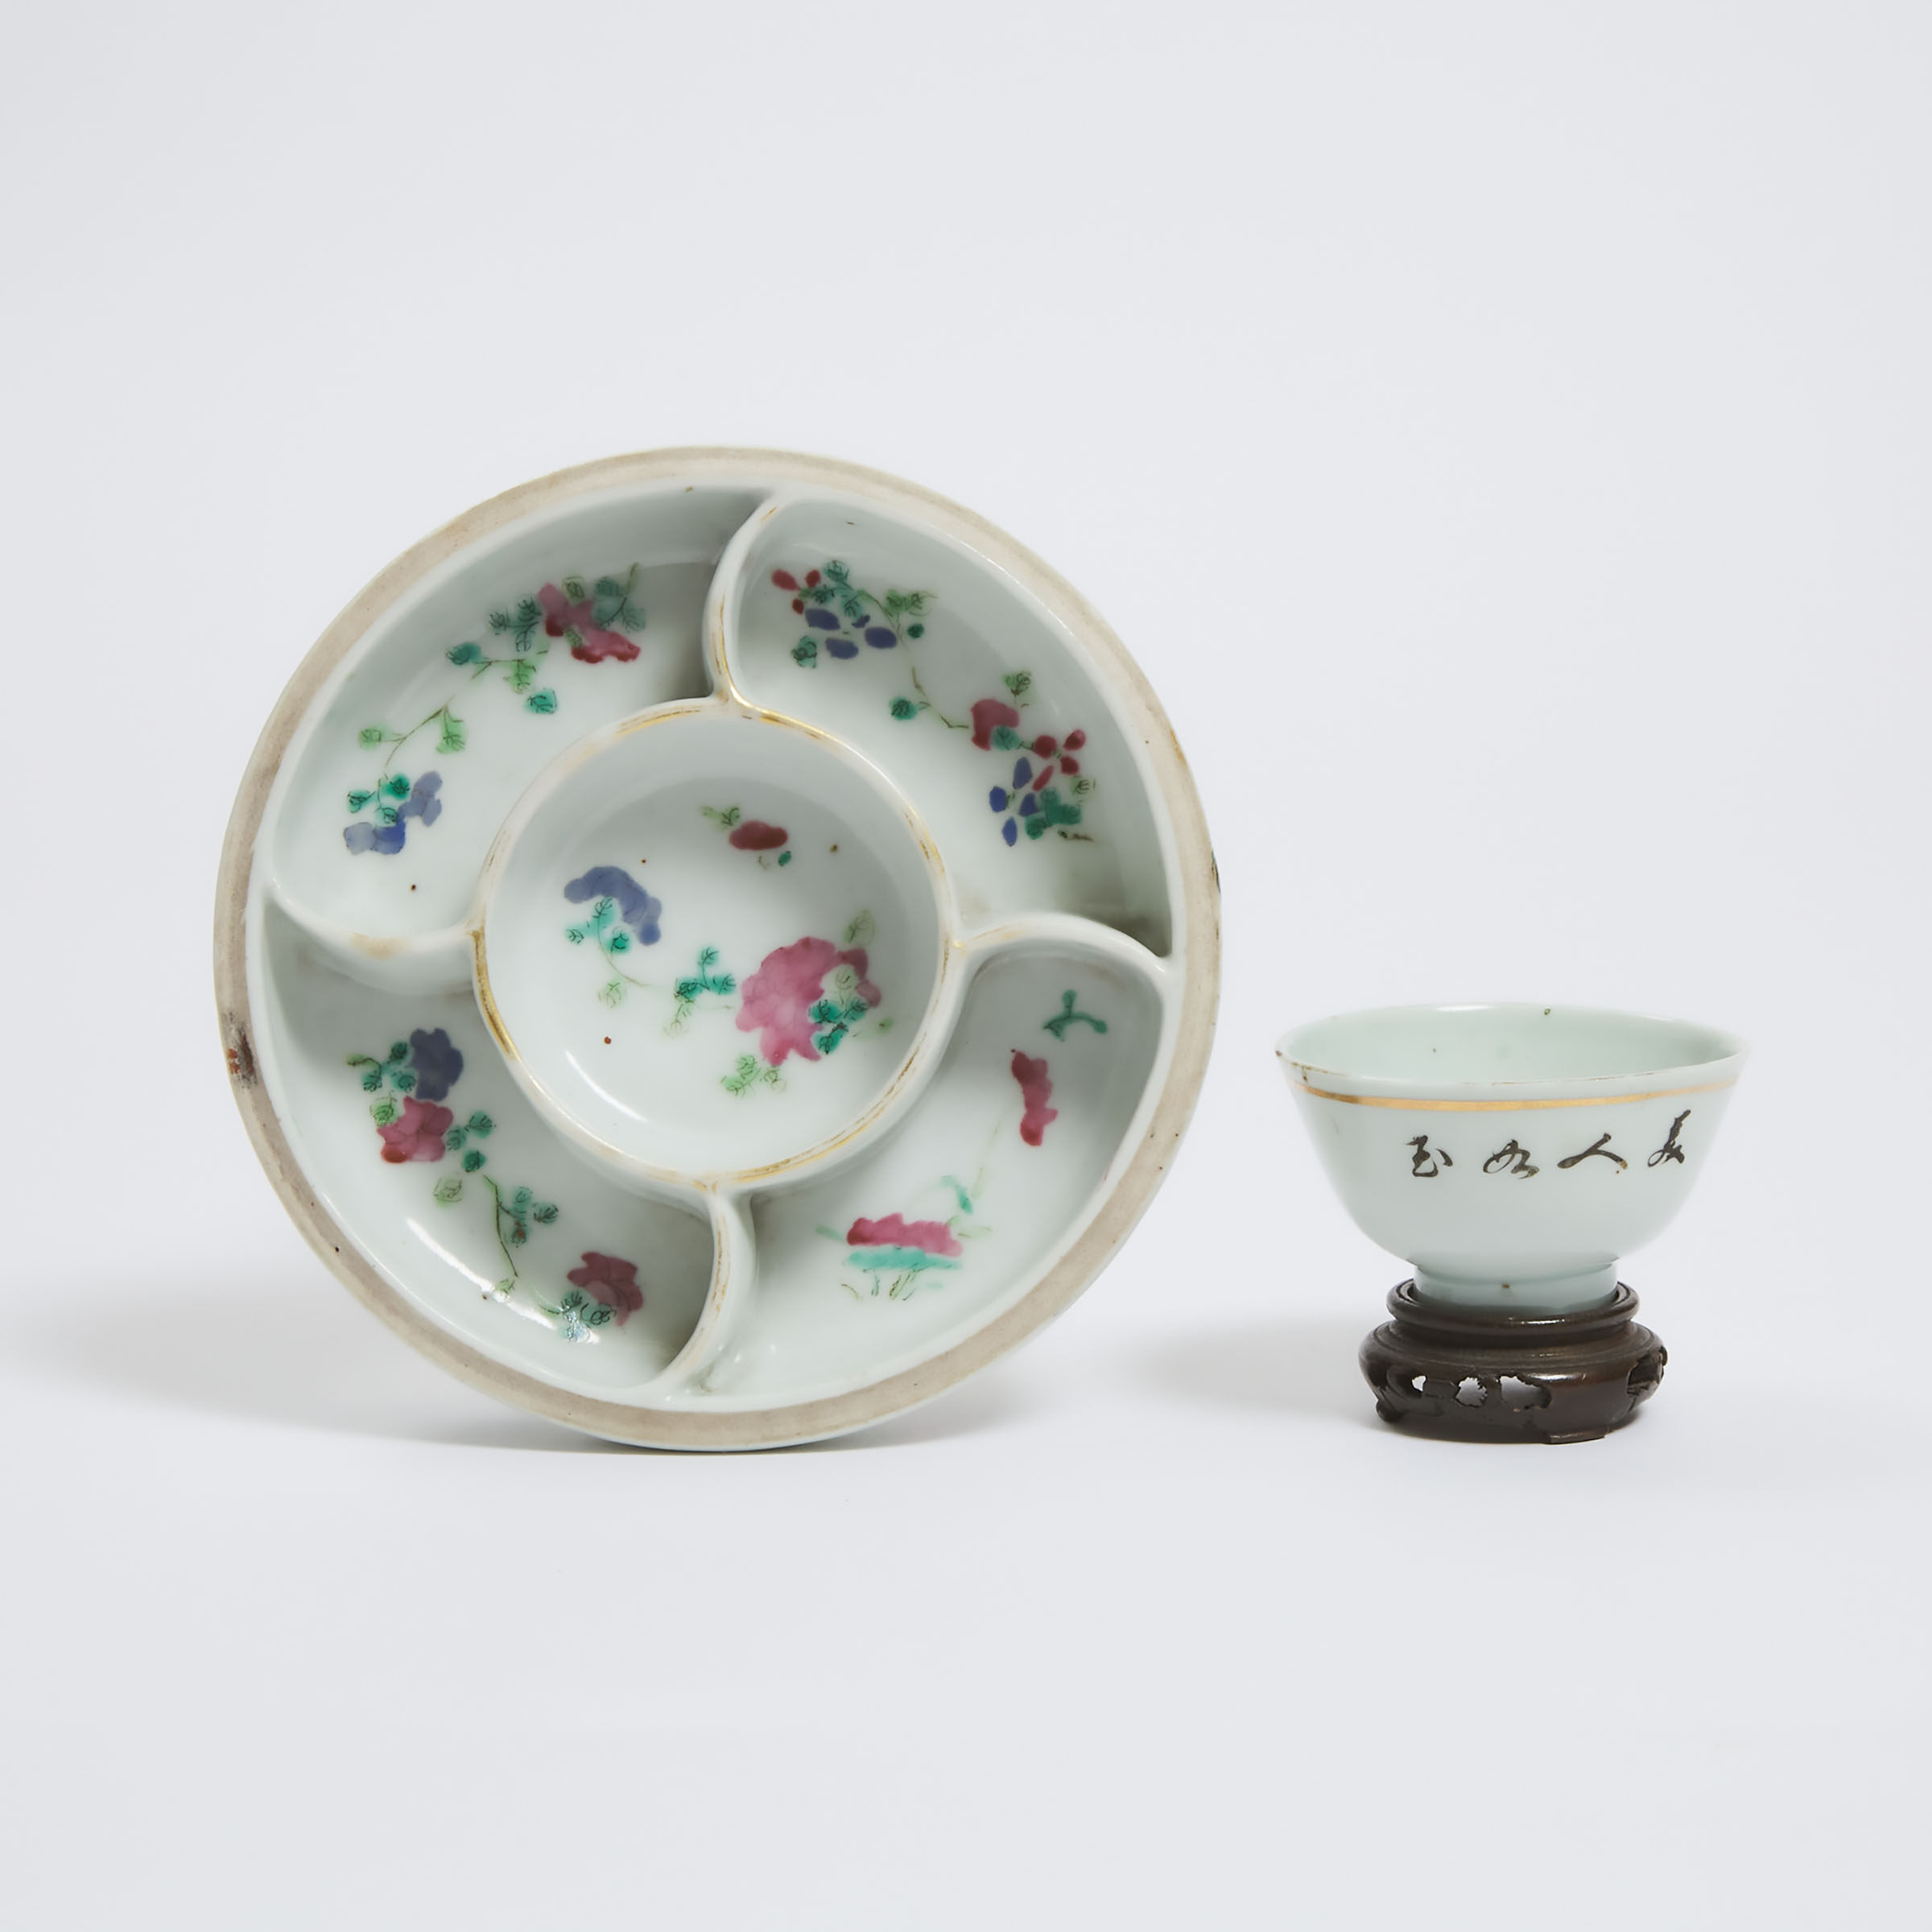 A Famille Rose Sweetmeat Dish, Jiaqing Mark, Together With an Enameled 'Beauty' Wine Cup, 19th/20th Century